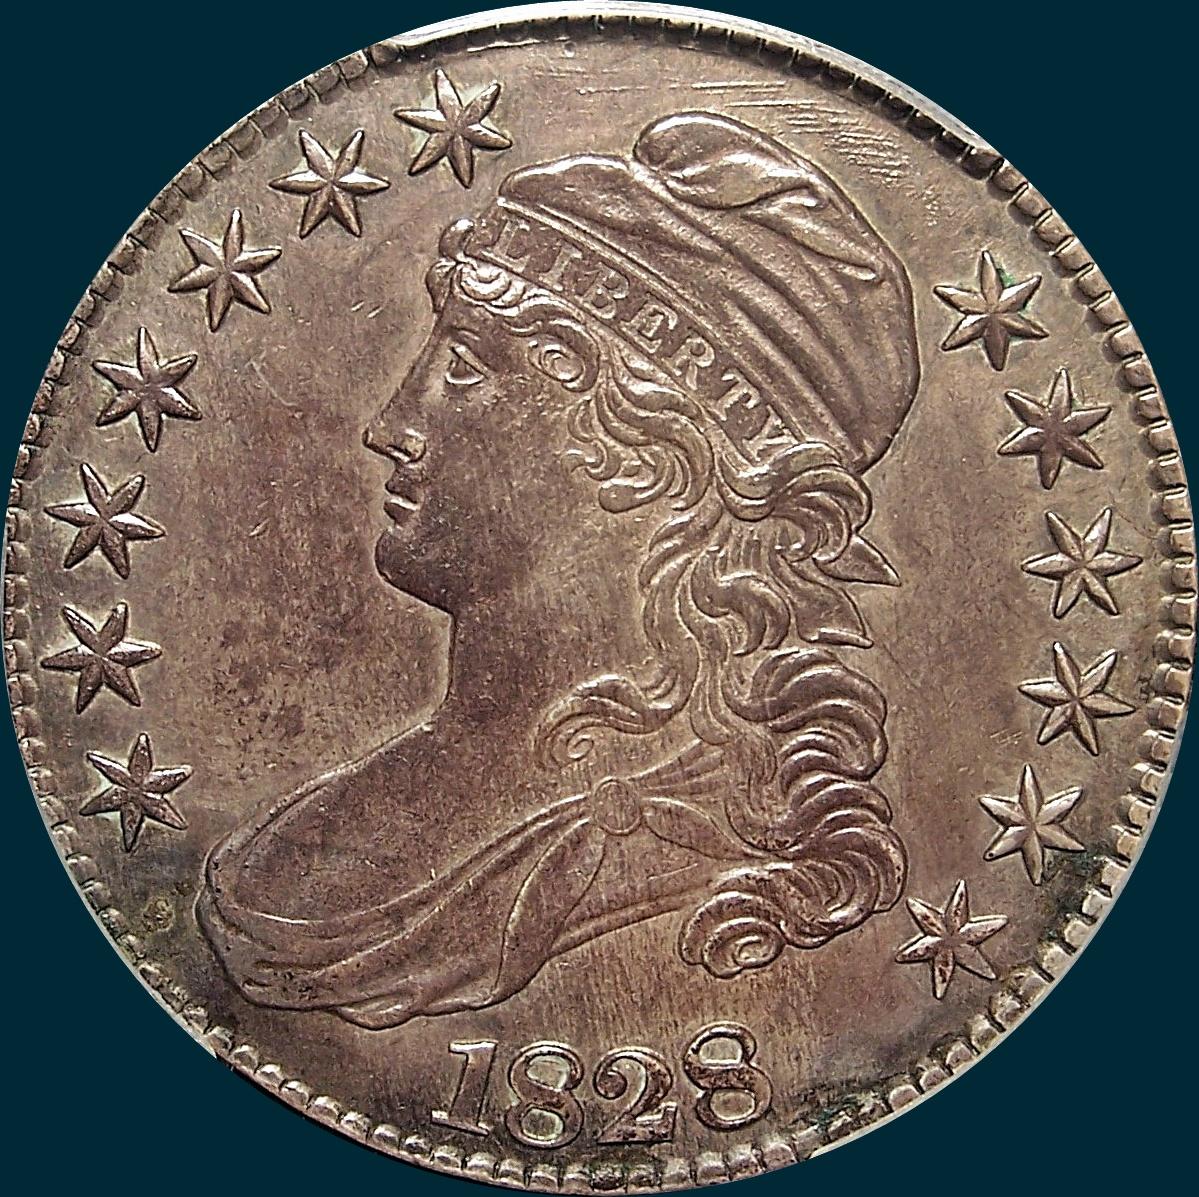 1828 O-109, square 2 large 8's,capped bust half dollar